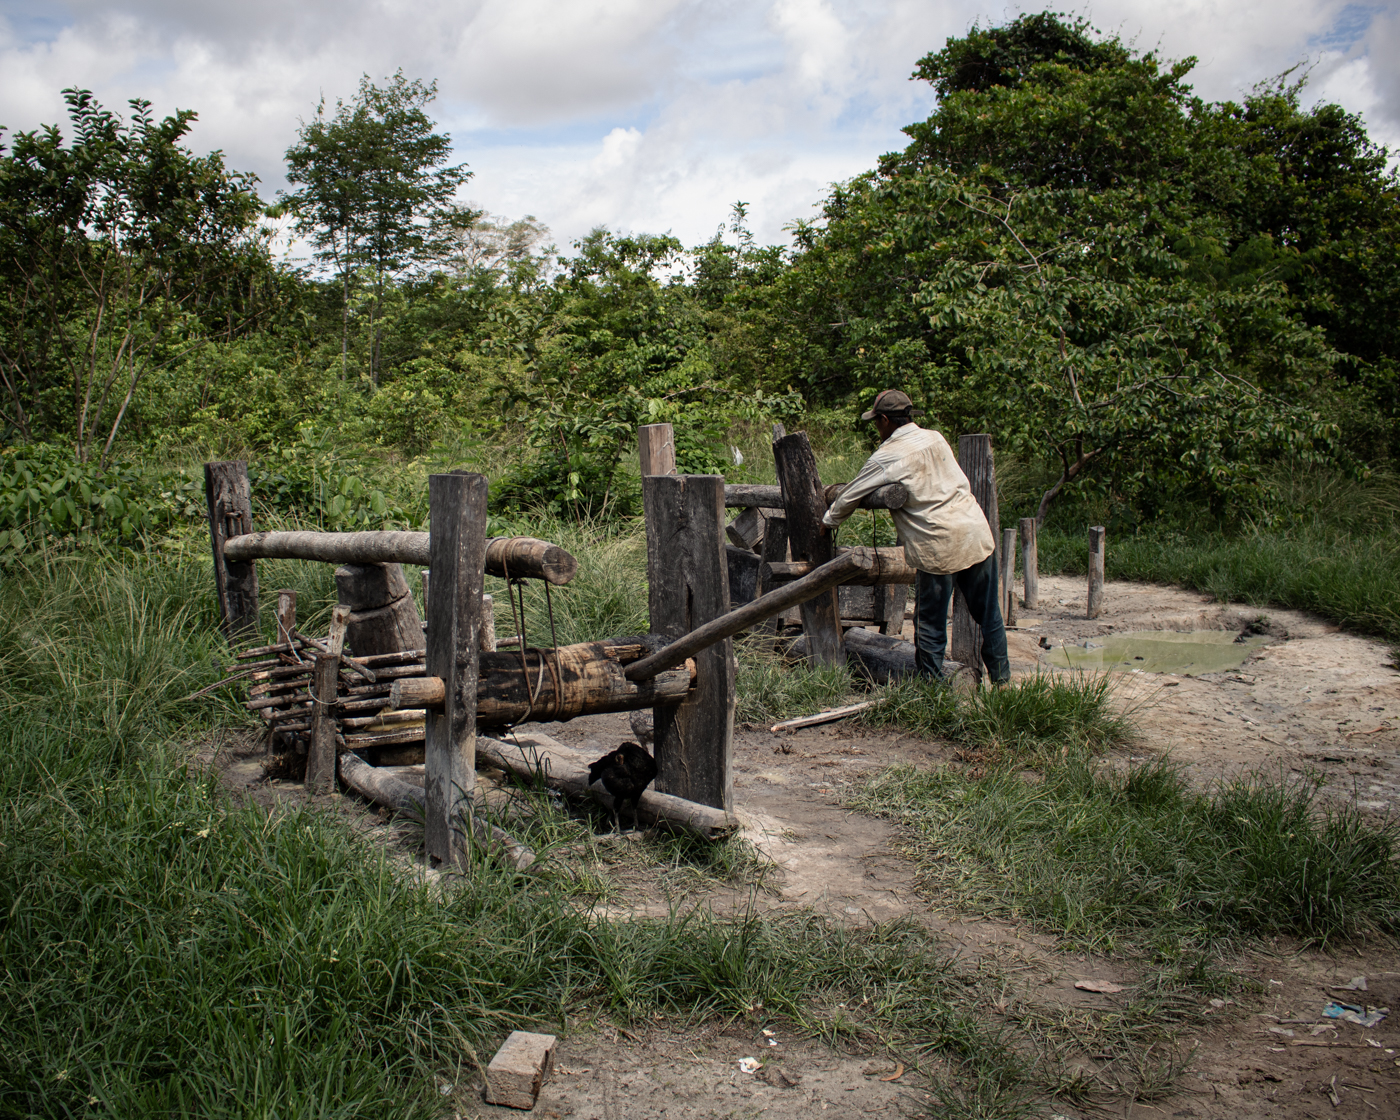 A member of the Novo Paraíso Indigenous community takes cassava paste out of a press, from where it will be processed in an oven to make flour.